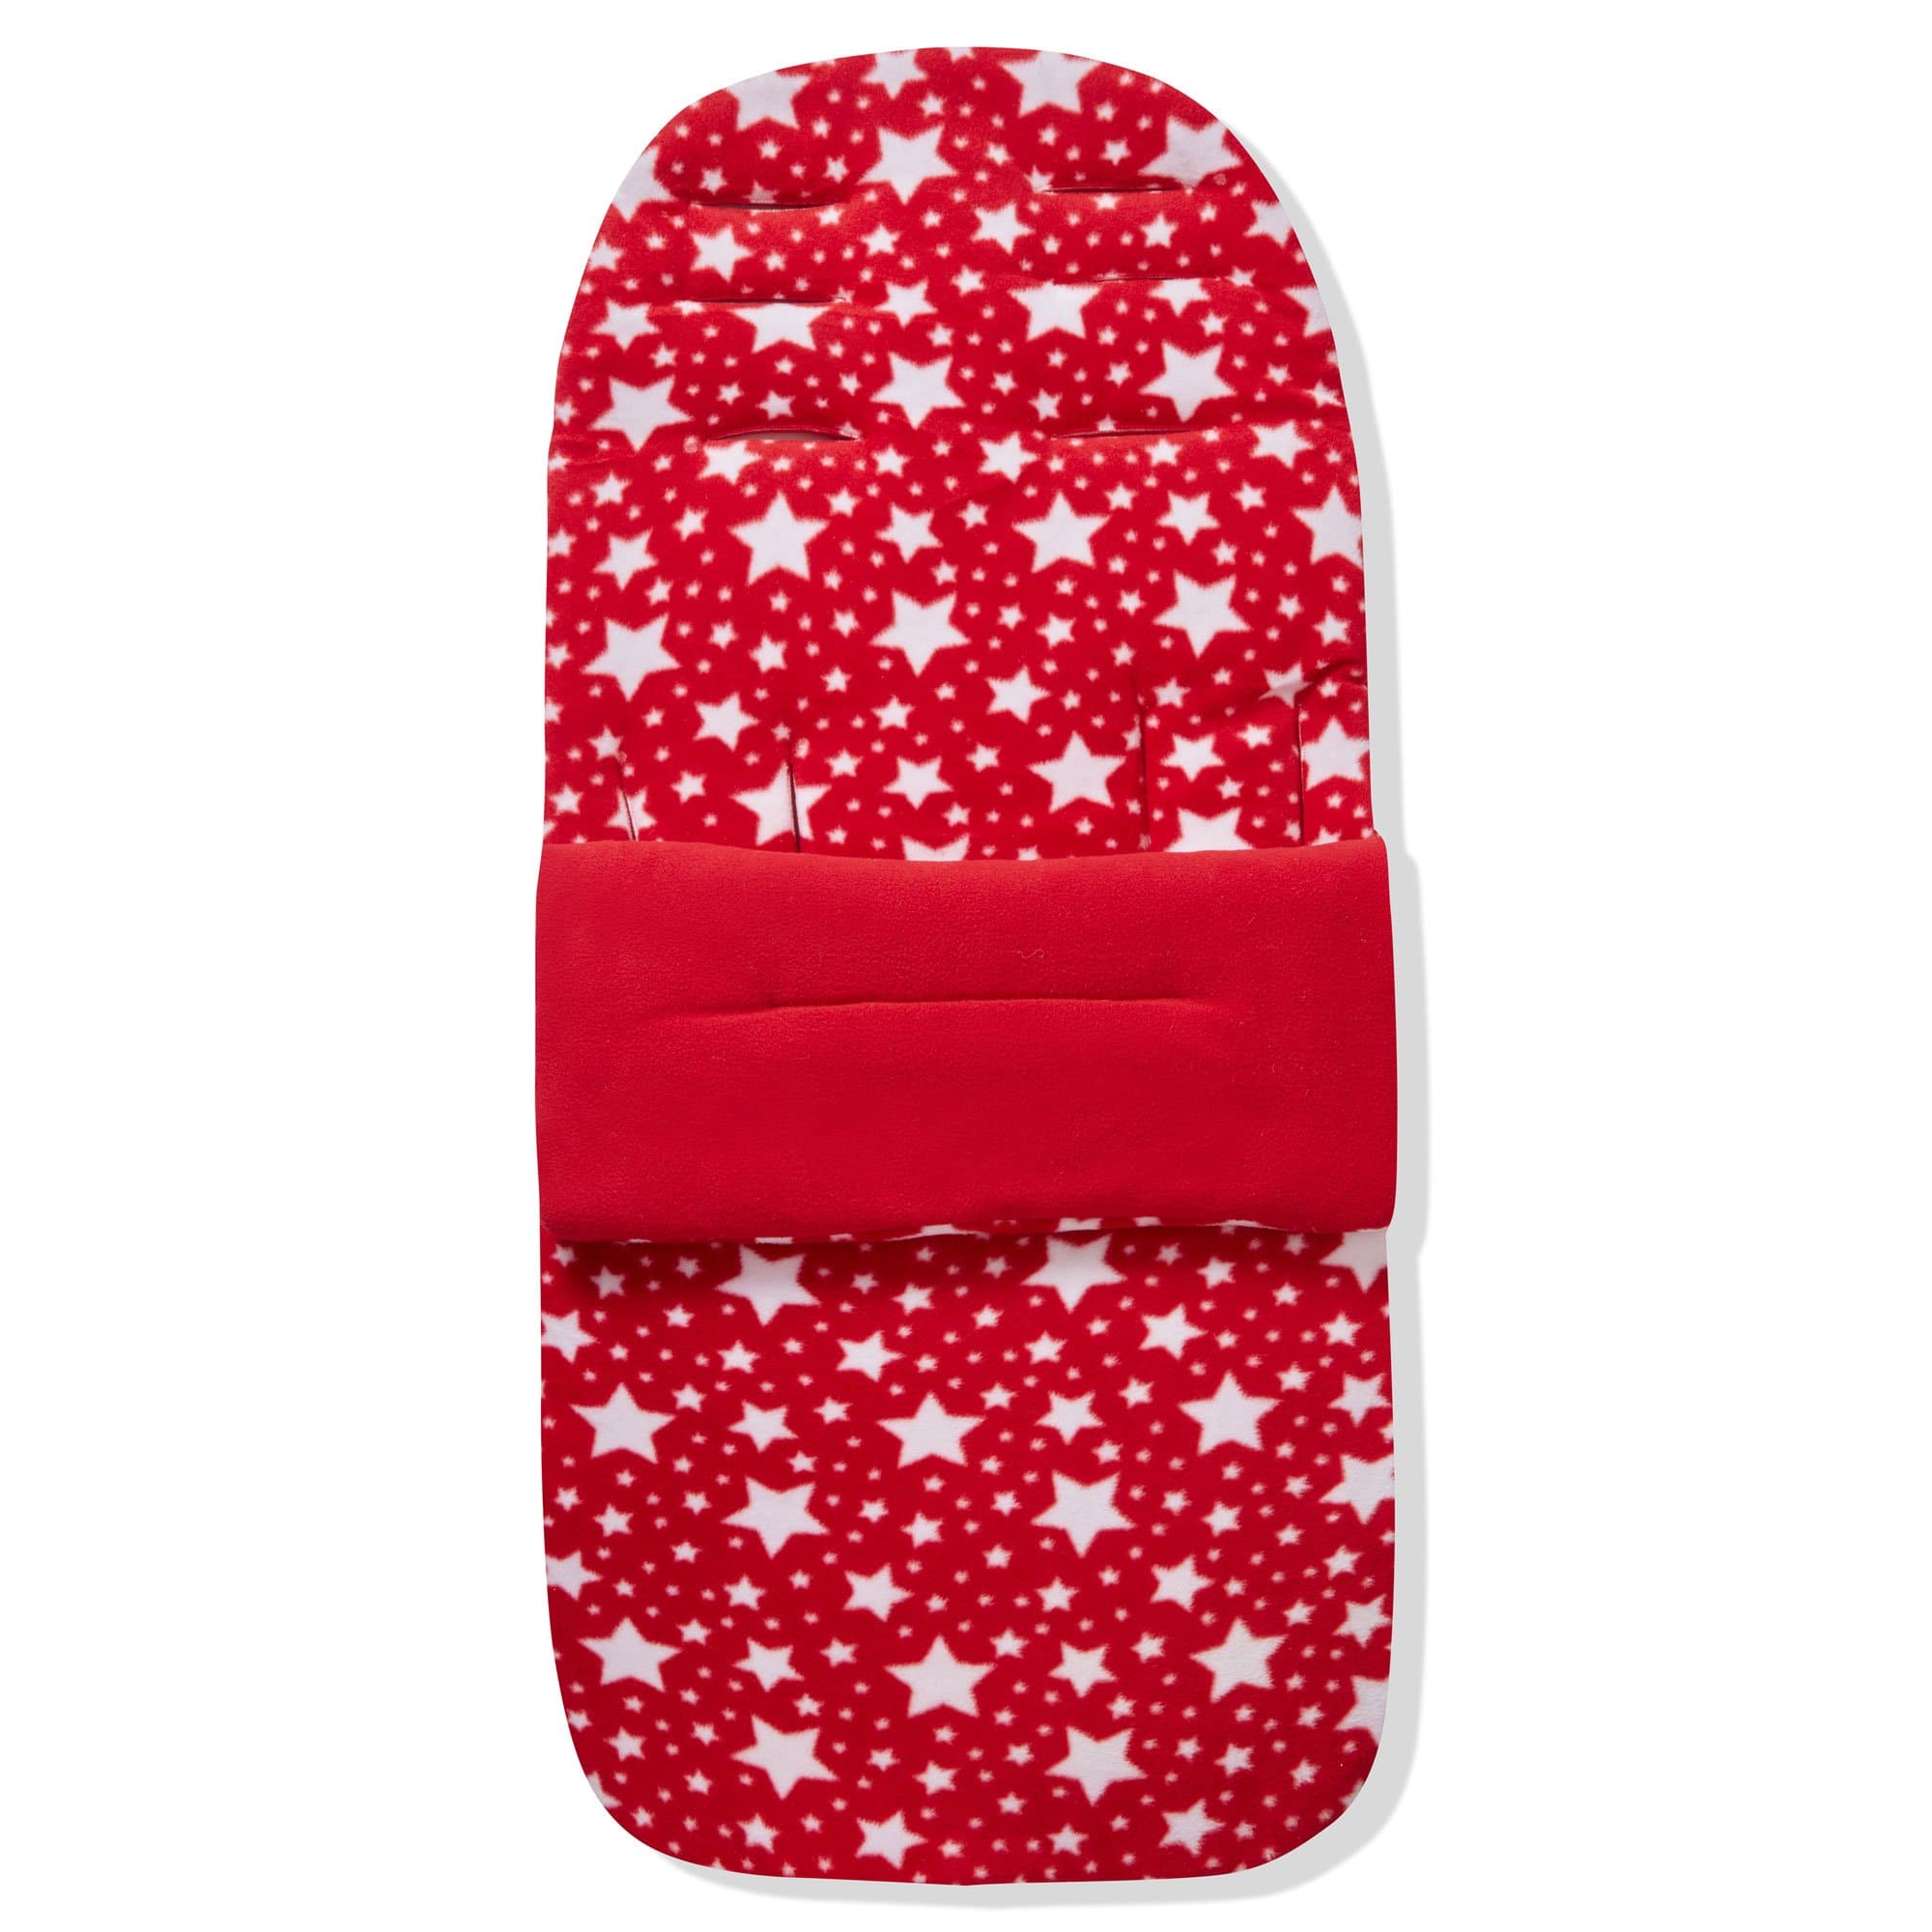 Fleece Footmuff / Cosy Toes Compatible with Graco - Red Star / Fits All Models | For Your Little One